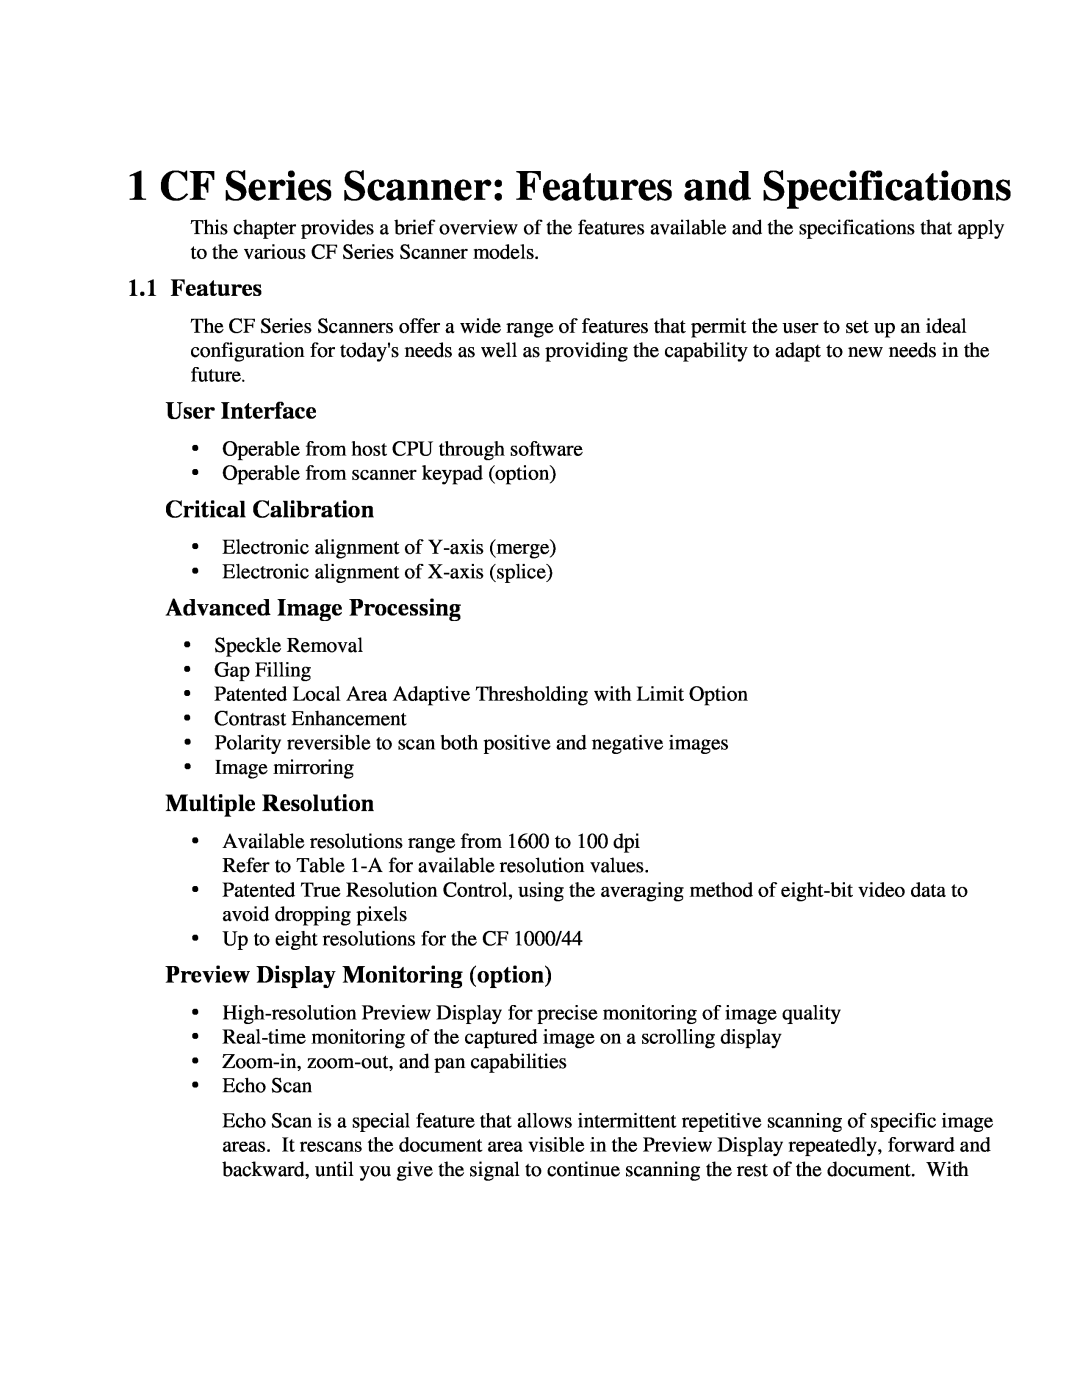 IBM CF Series Scanner Features and Specifications, User Interface, Critical Calibration, Advanced Image Processing 